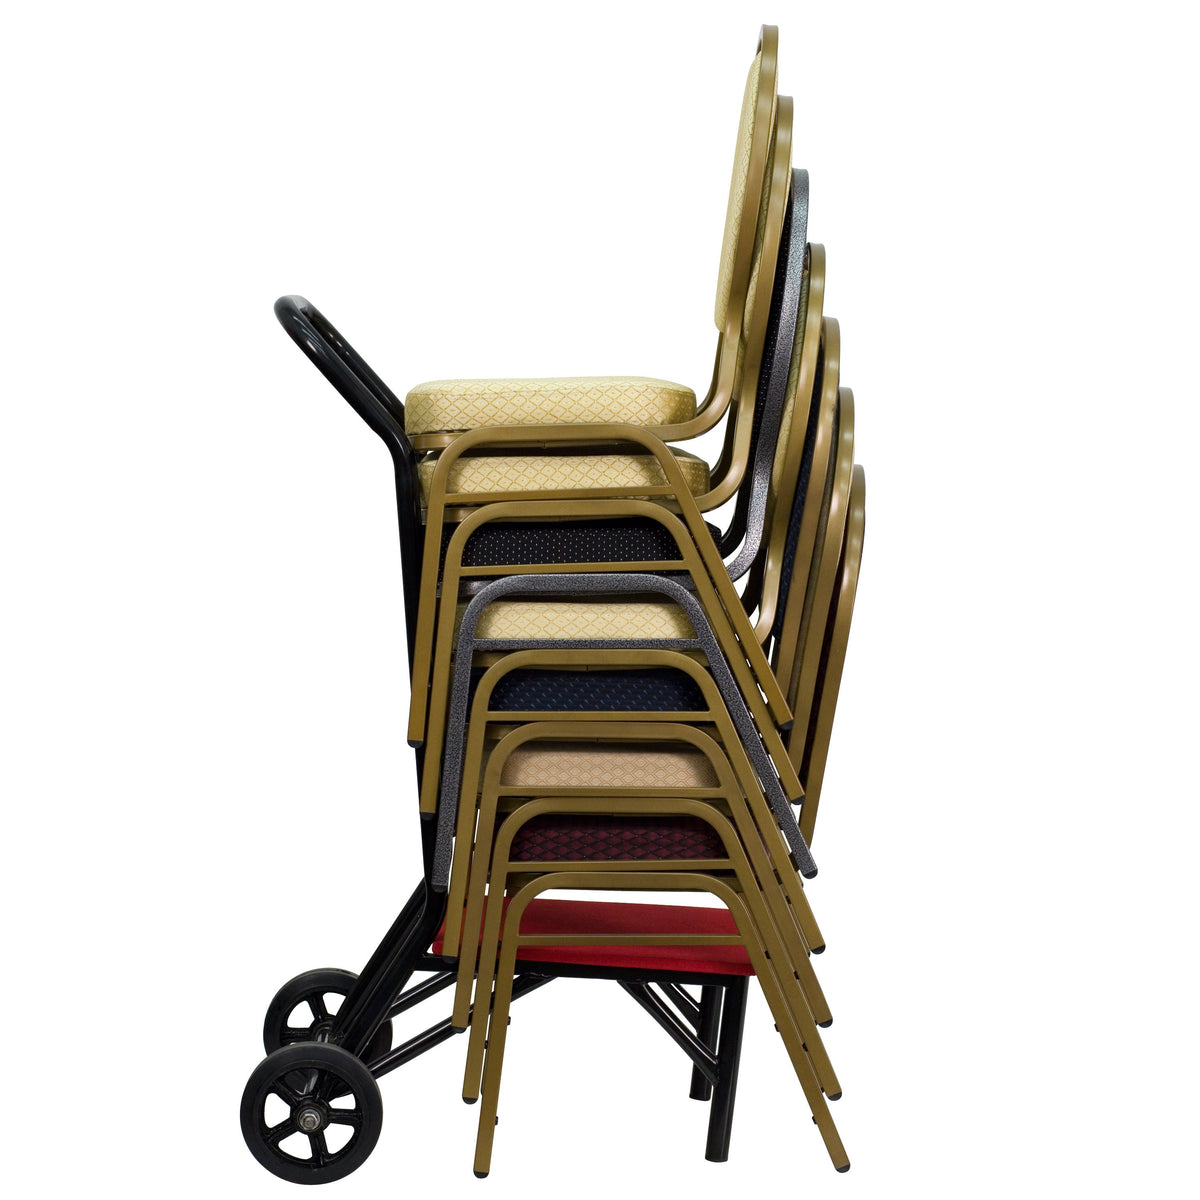 Banquet Chair / Stack Chair Dolly - Material Handling Equipment - Handled Dolly